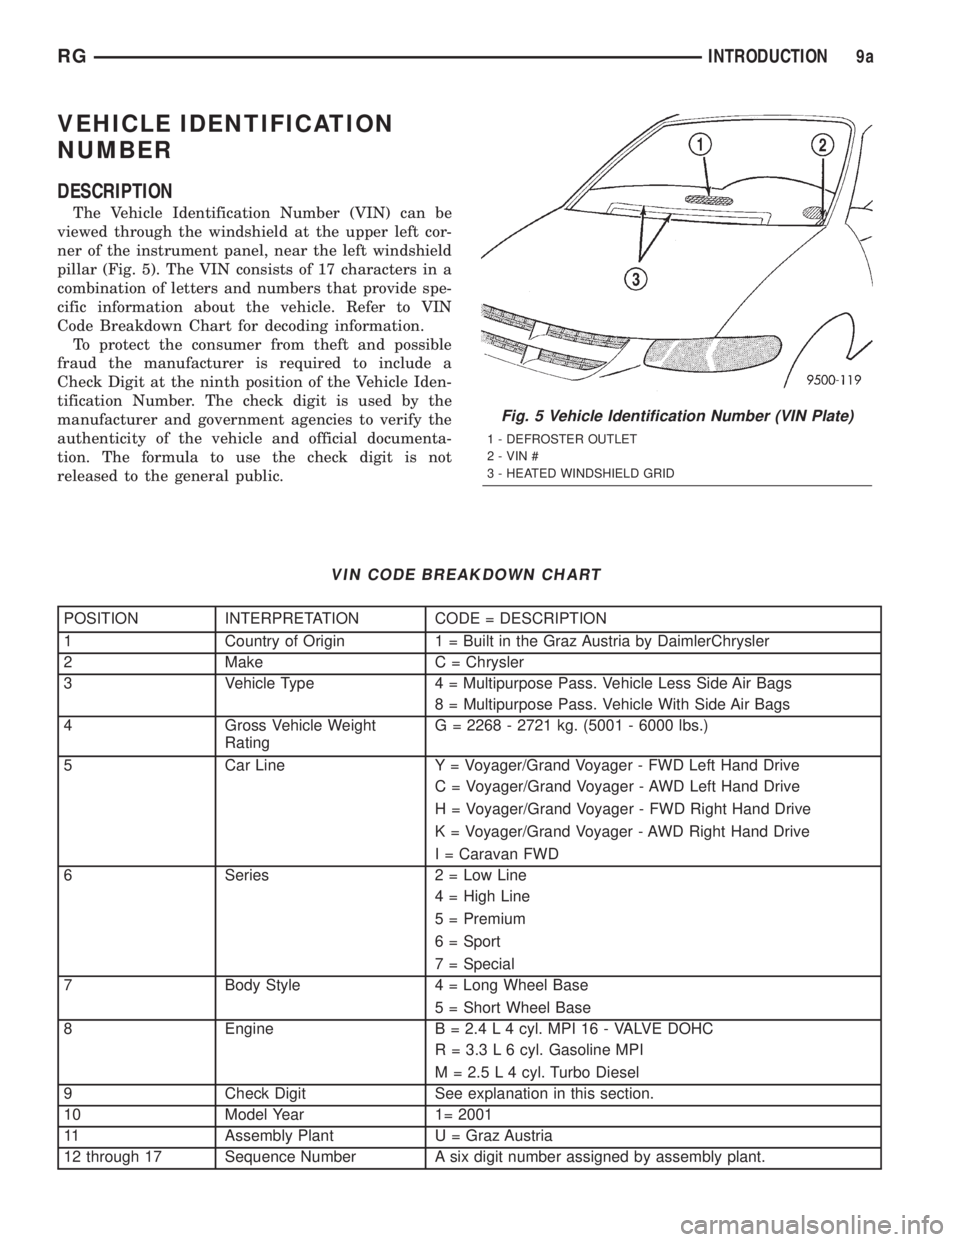 CHRYSLER VOYAGER 2001  Service Manual VEHICLE IDENTIFICATION
NUMBER
DESCRIPTION
The Vehicle Identification Number (VIN) can be
viewed through the windshield at the upper left cor-
ner of the instrument panel, near the left windshield
pill